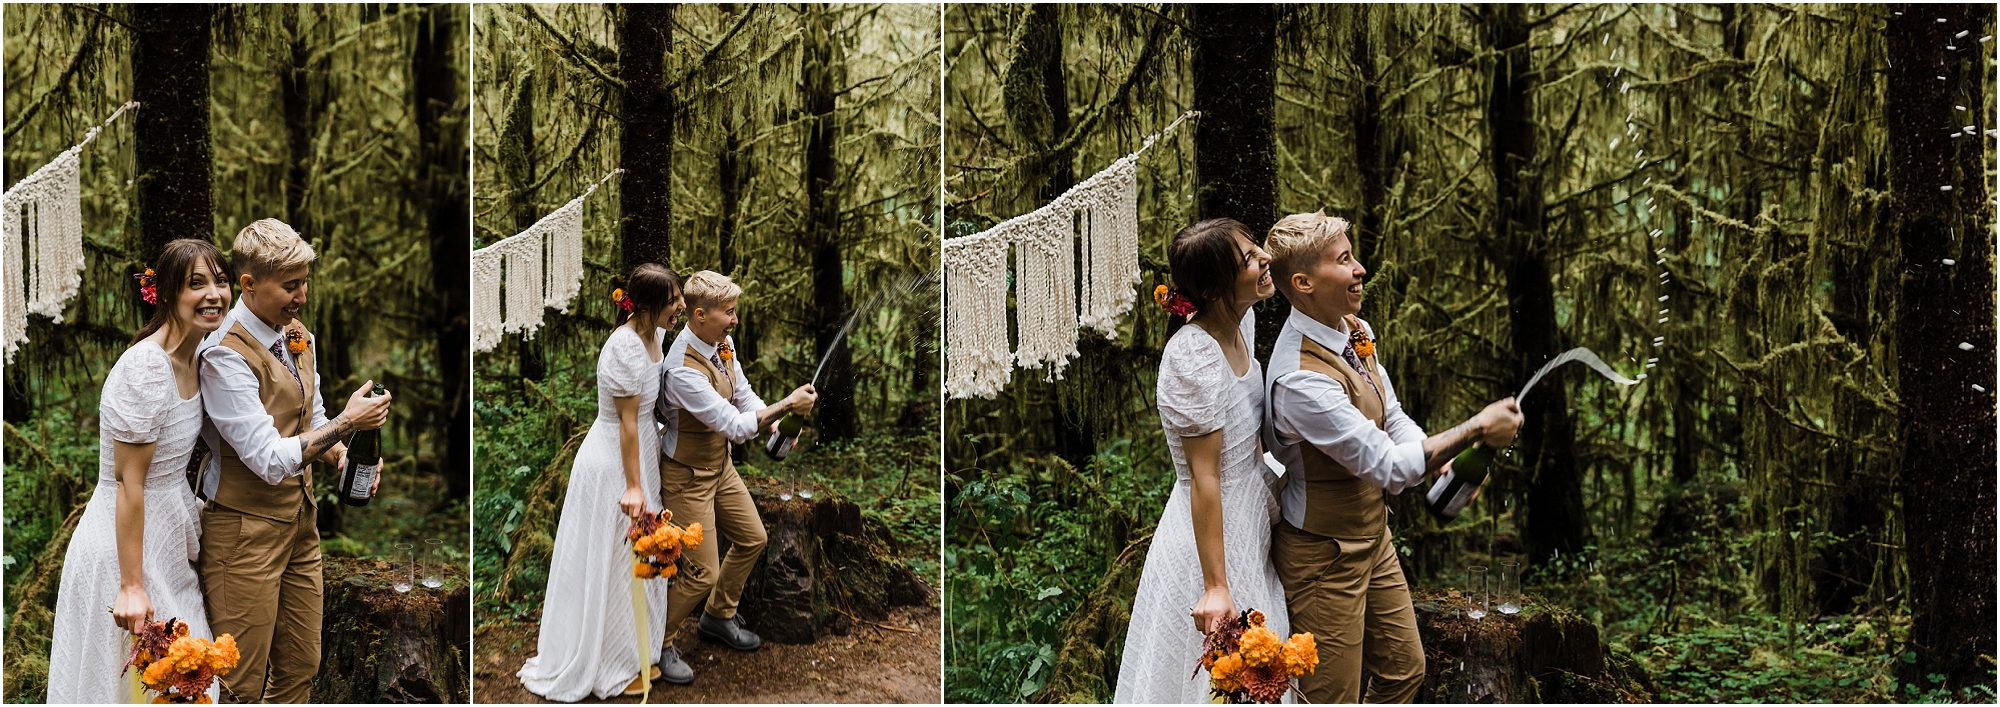 A LGBTQ+ couple celebrates their union by popping sparkling water after their gorgeous PNW hiking adventure elopement ceremony in Oregon. | Erica Swantek Photography